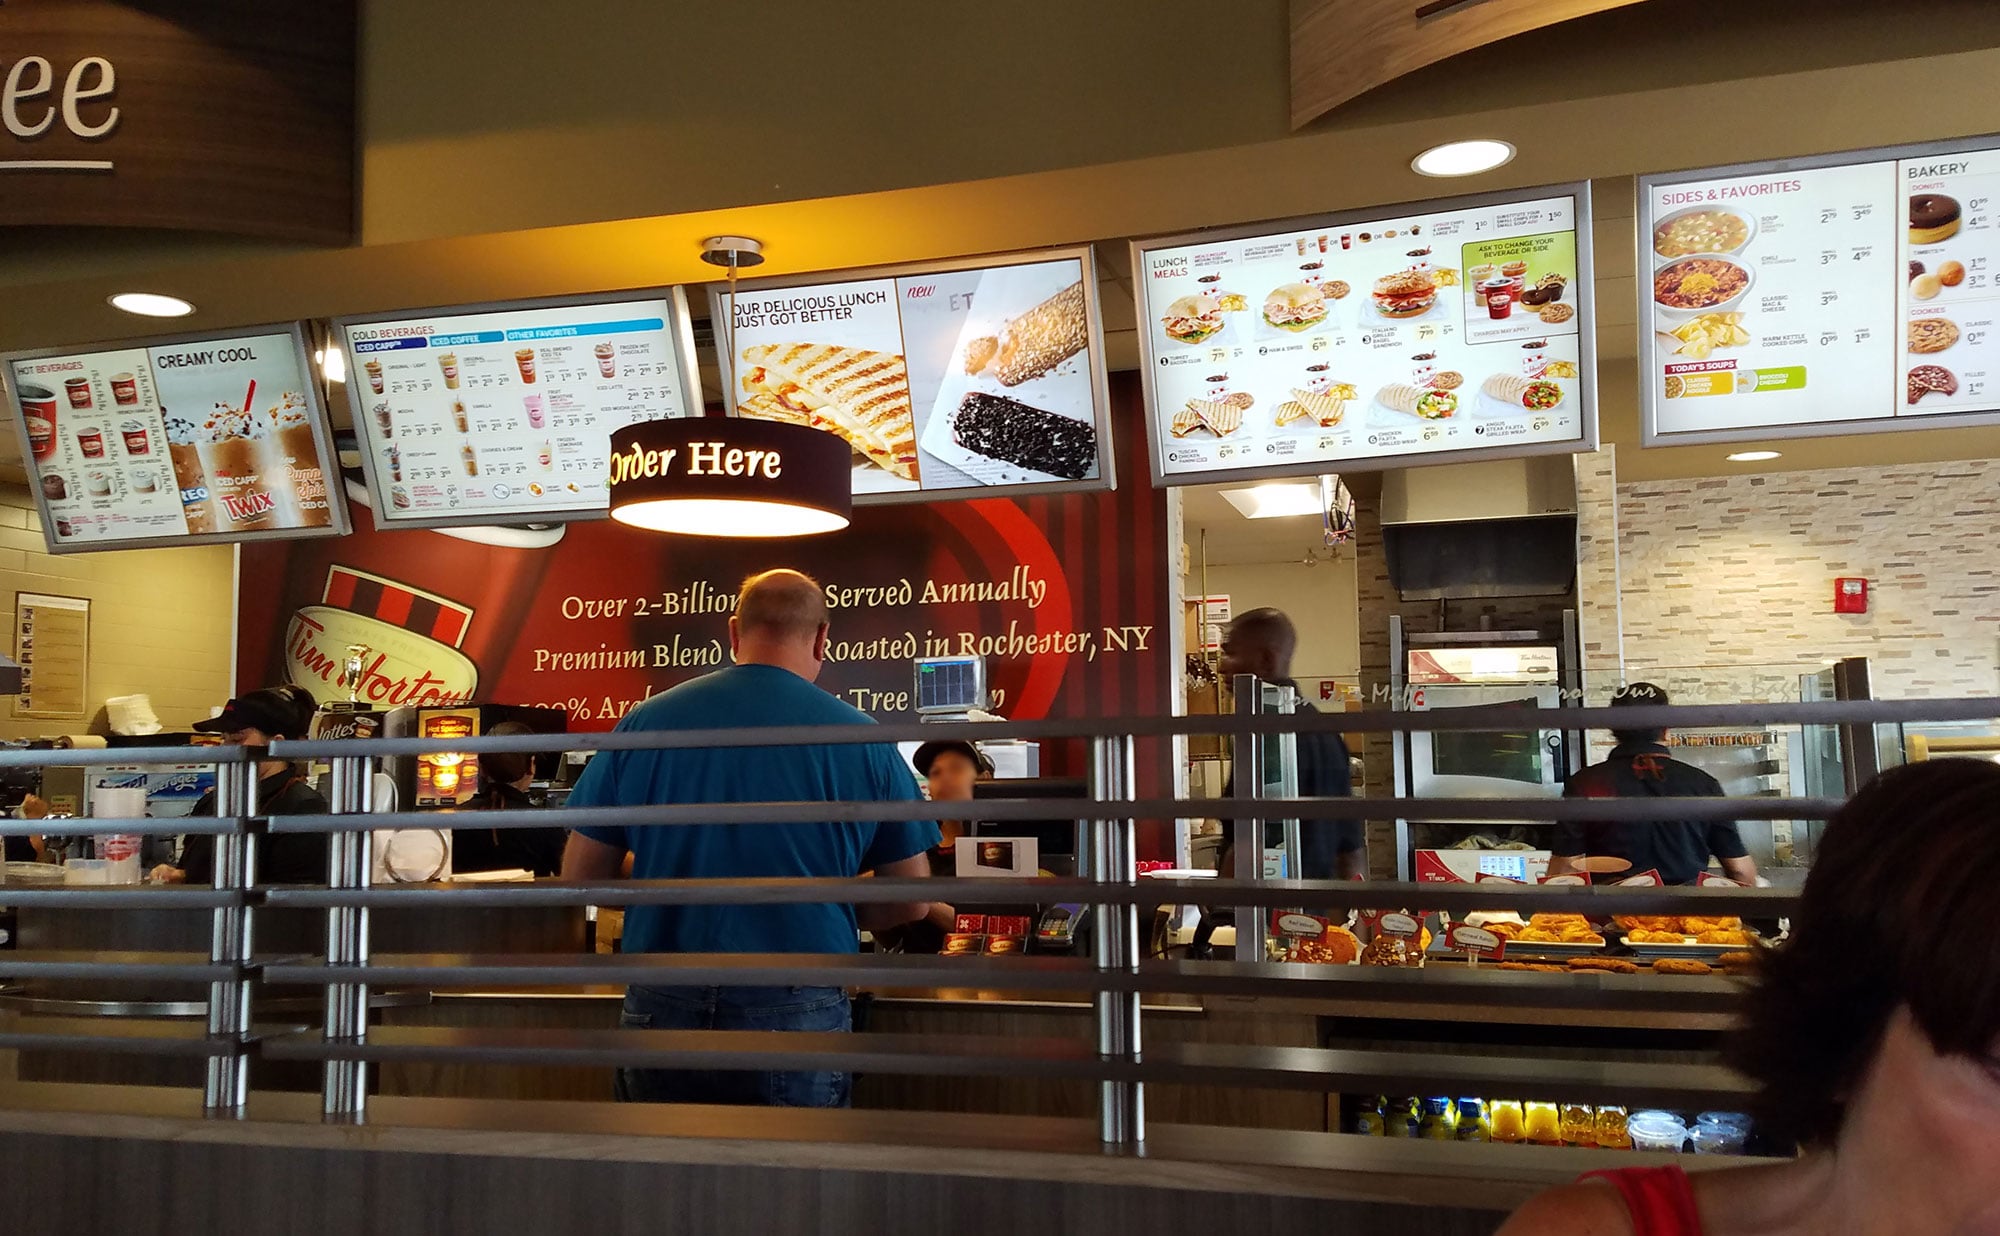 A Tim Hortons interior with affordable menu options.